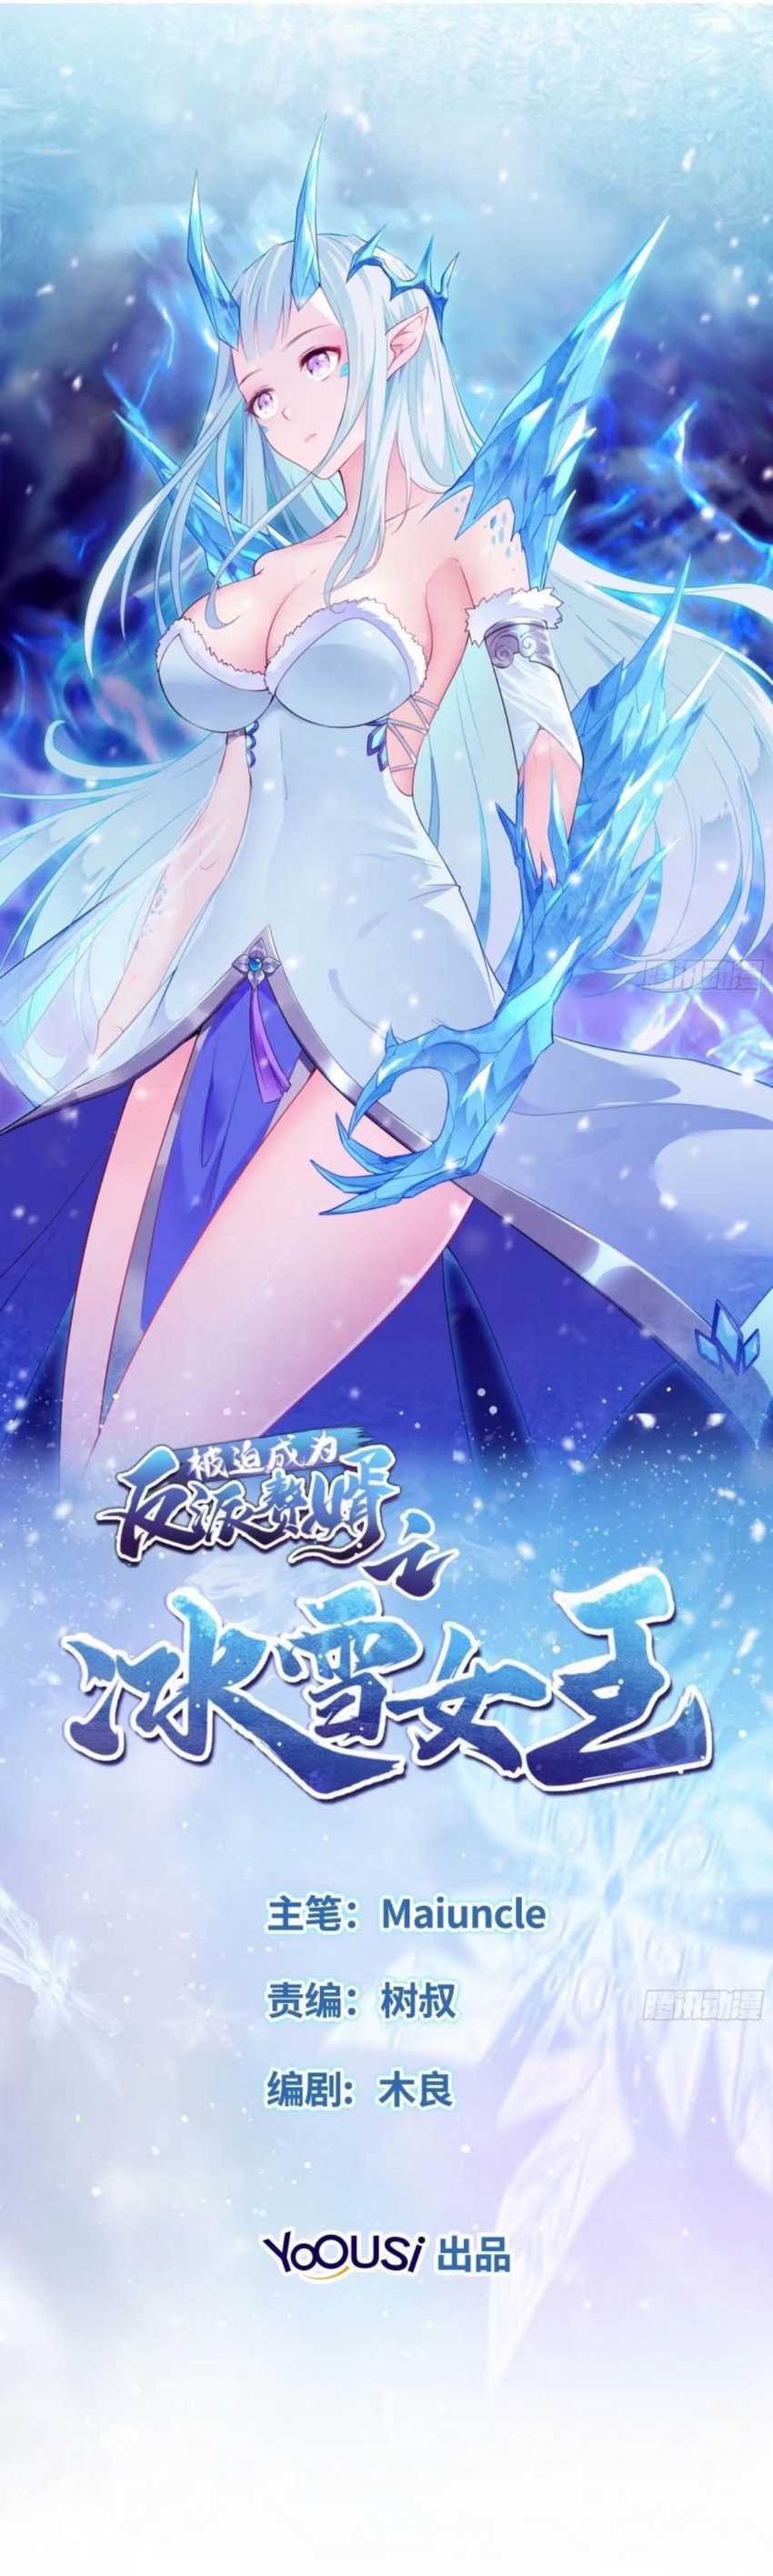 Baca Ice Queen Forced to Become Villain’s Son-in-law Chapter 0  - GudangKomik